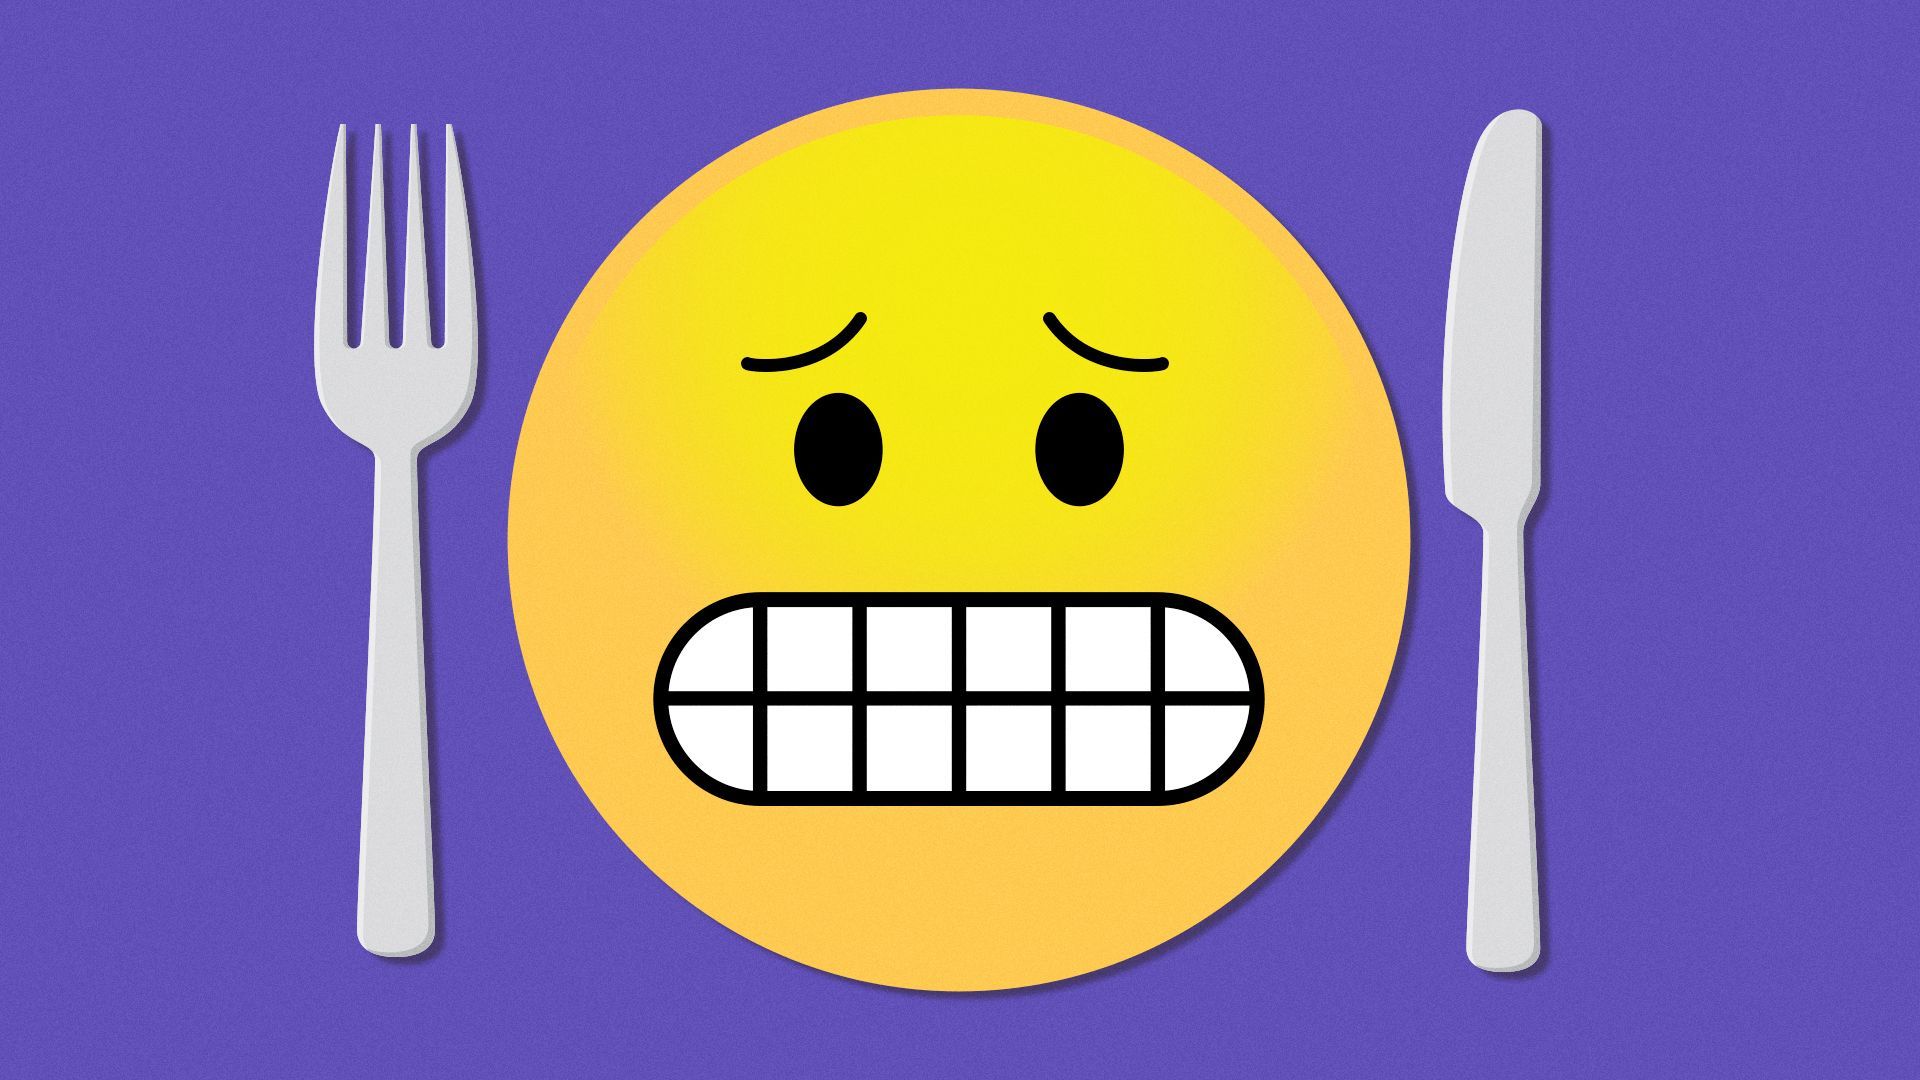 Illustration of a knife and fork next to a plate in the shape of a grimacing emoji.